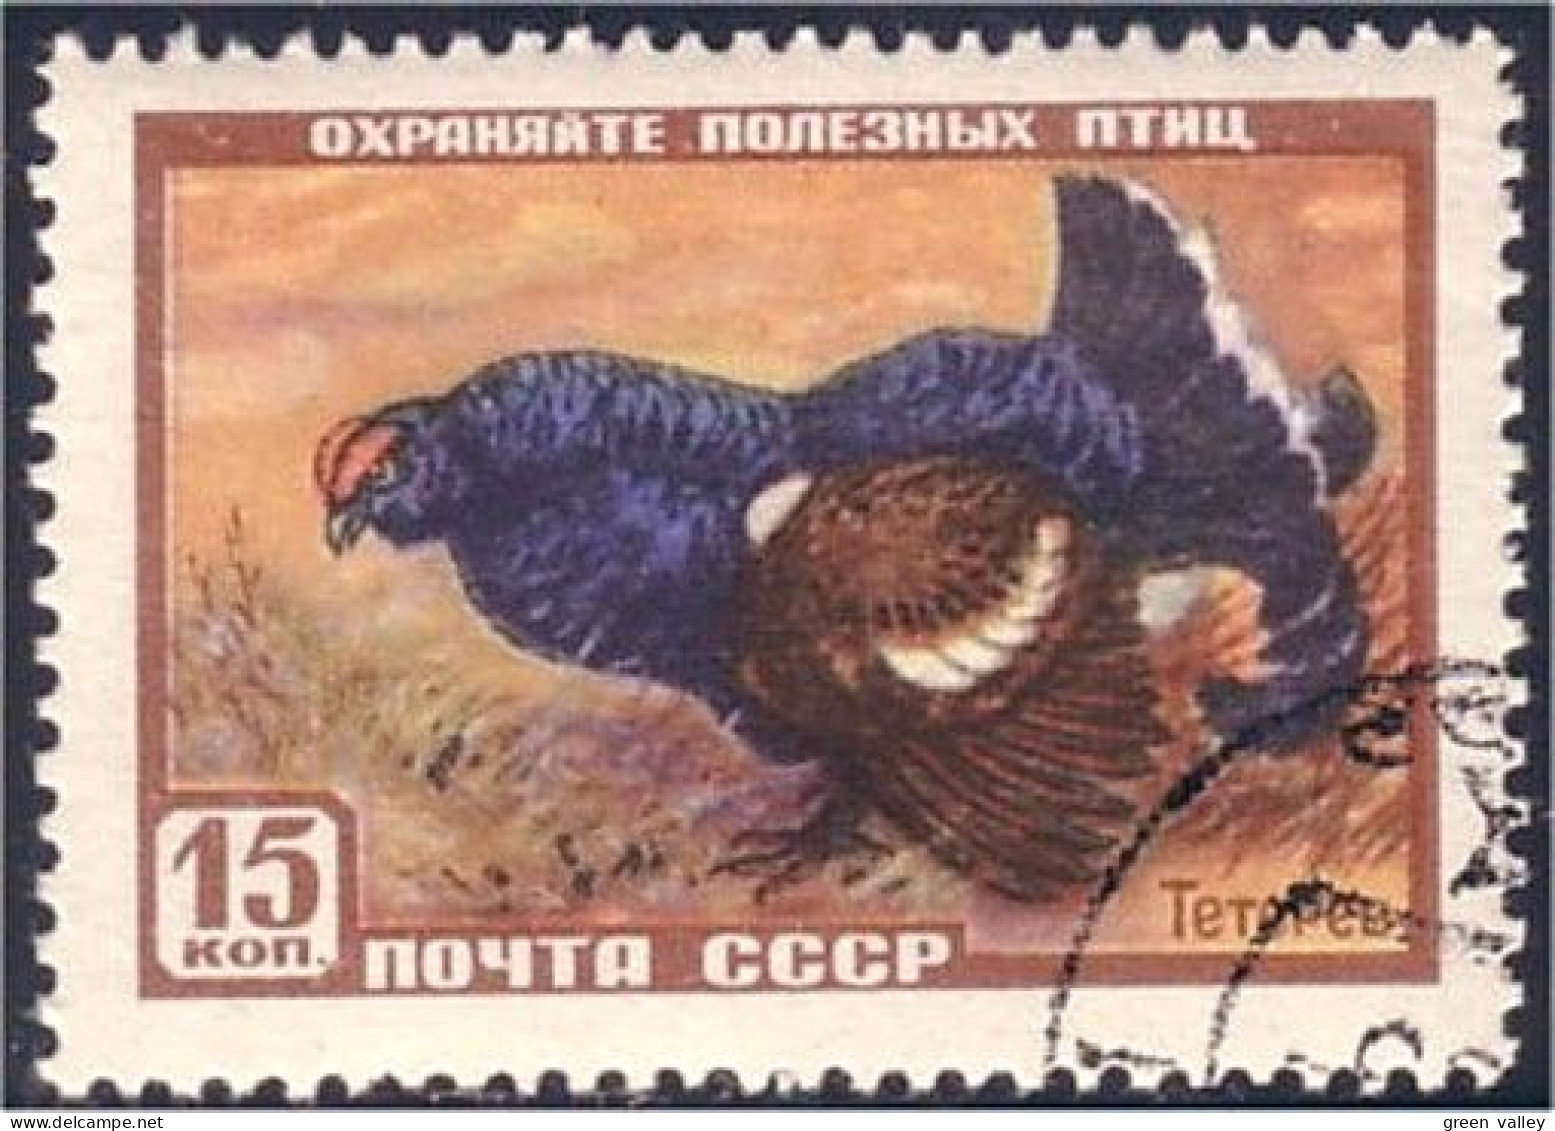 773 Russie Chicken Poulet Coq Cock Rooster Huhn (RUK-28) - Gallinaceans & Pheasants